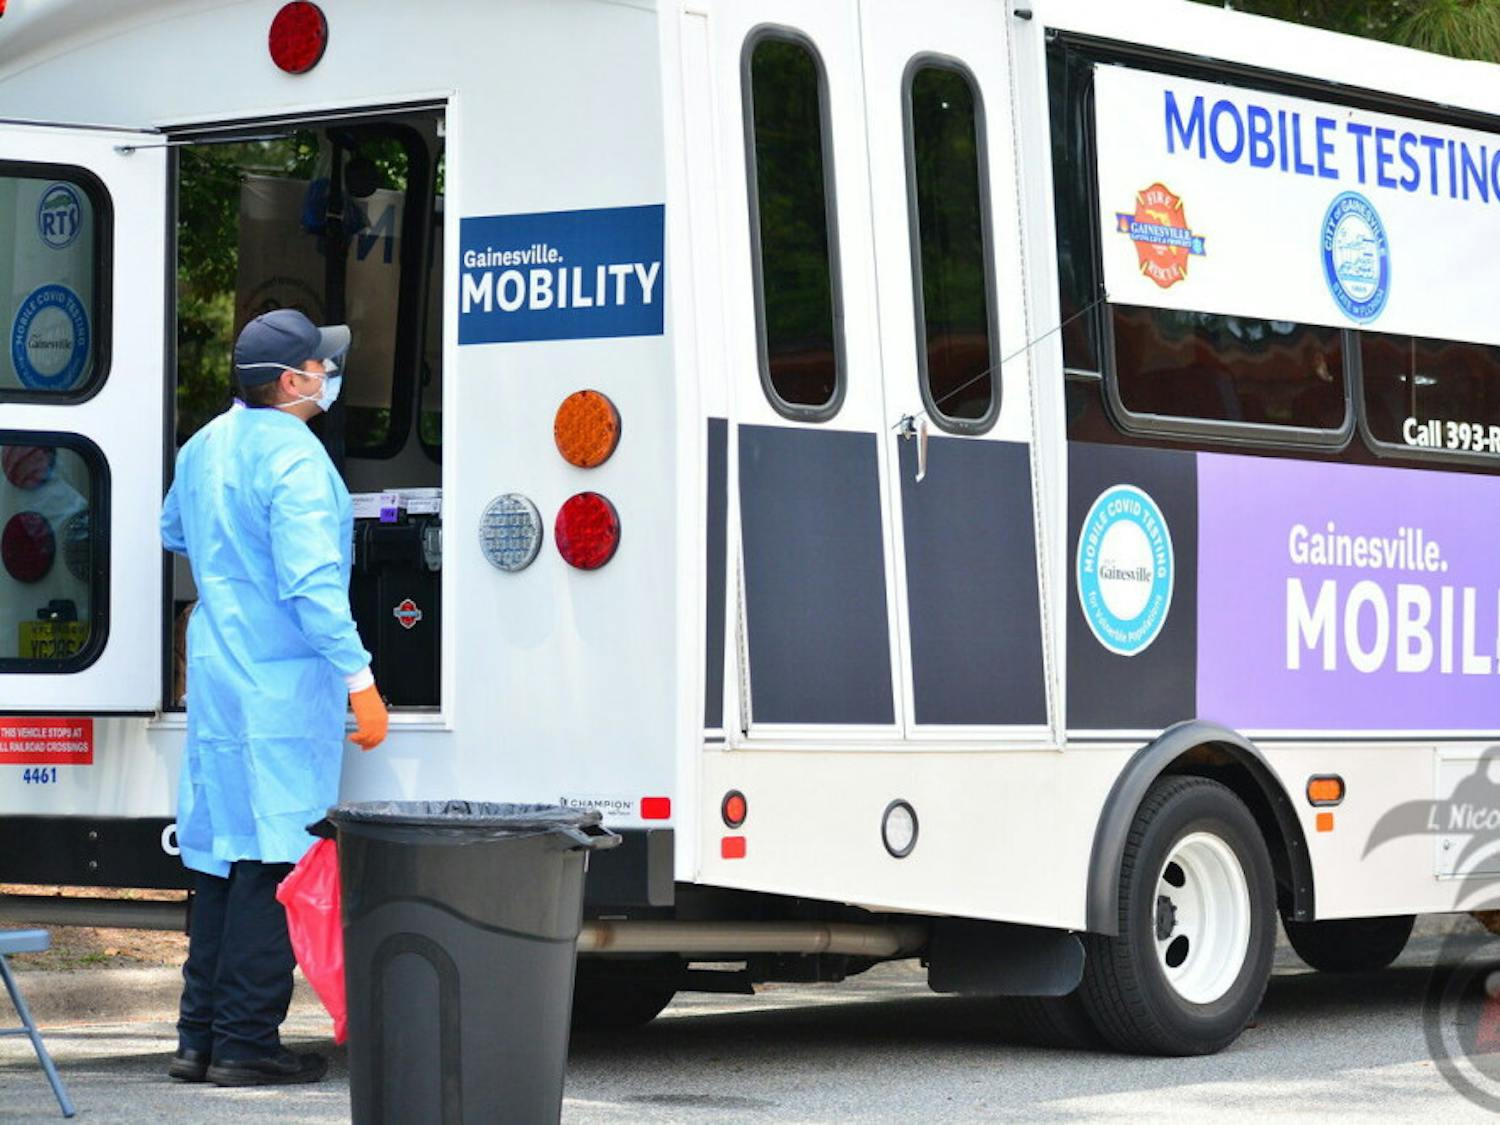 The mobile testing bus, parked and ready to administer free COVID-19 tests to anyone who wants one.